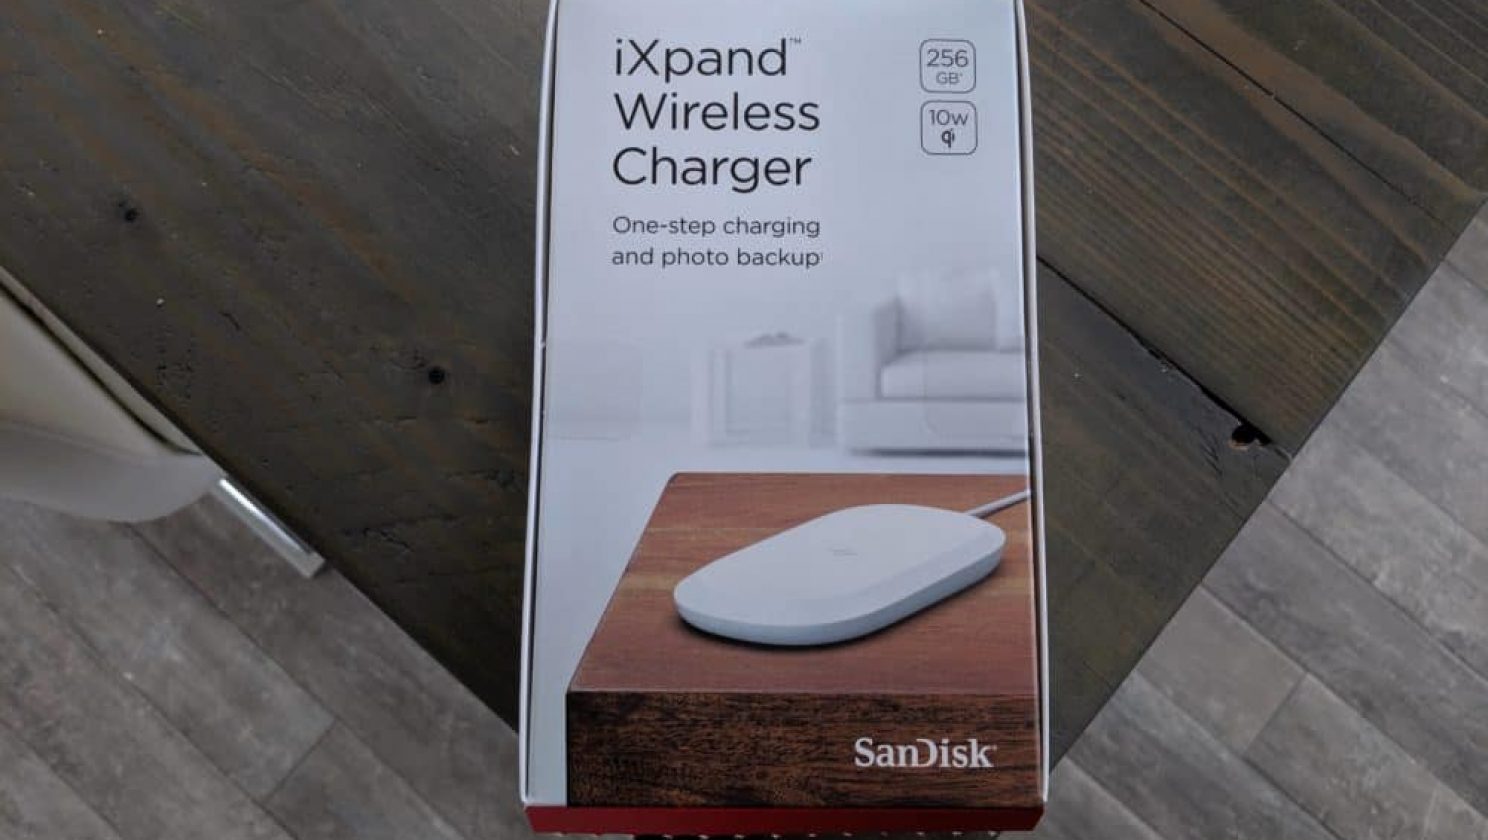 SanDisk-iXpand-Wireless-Charger-e1566393401408